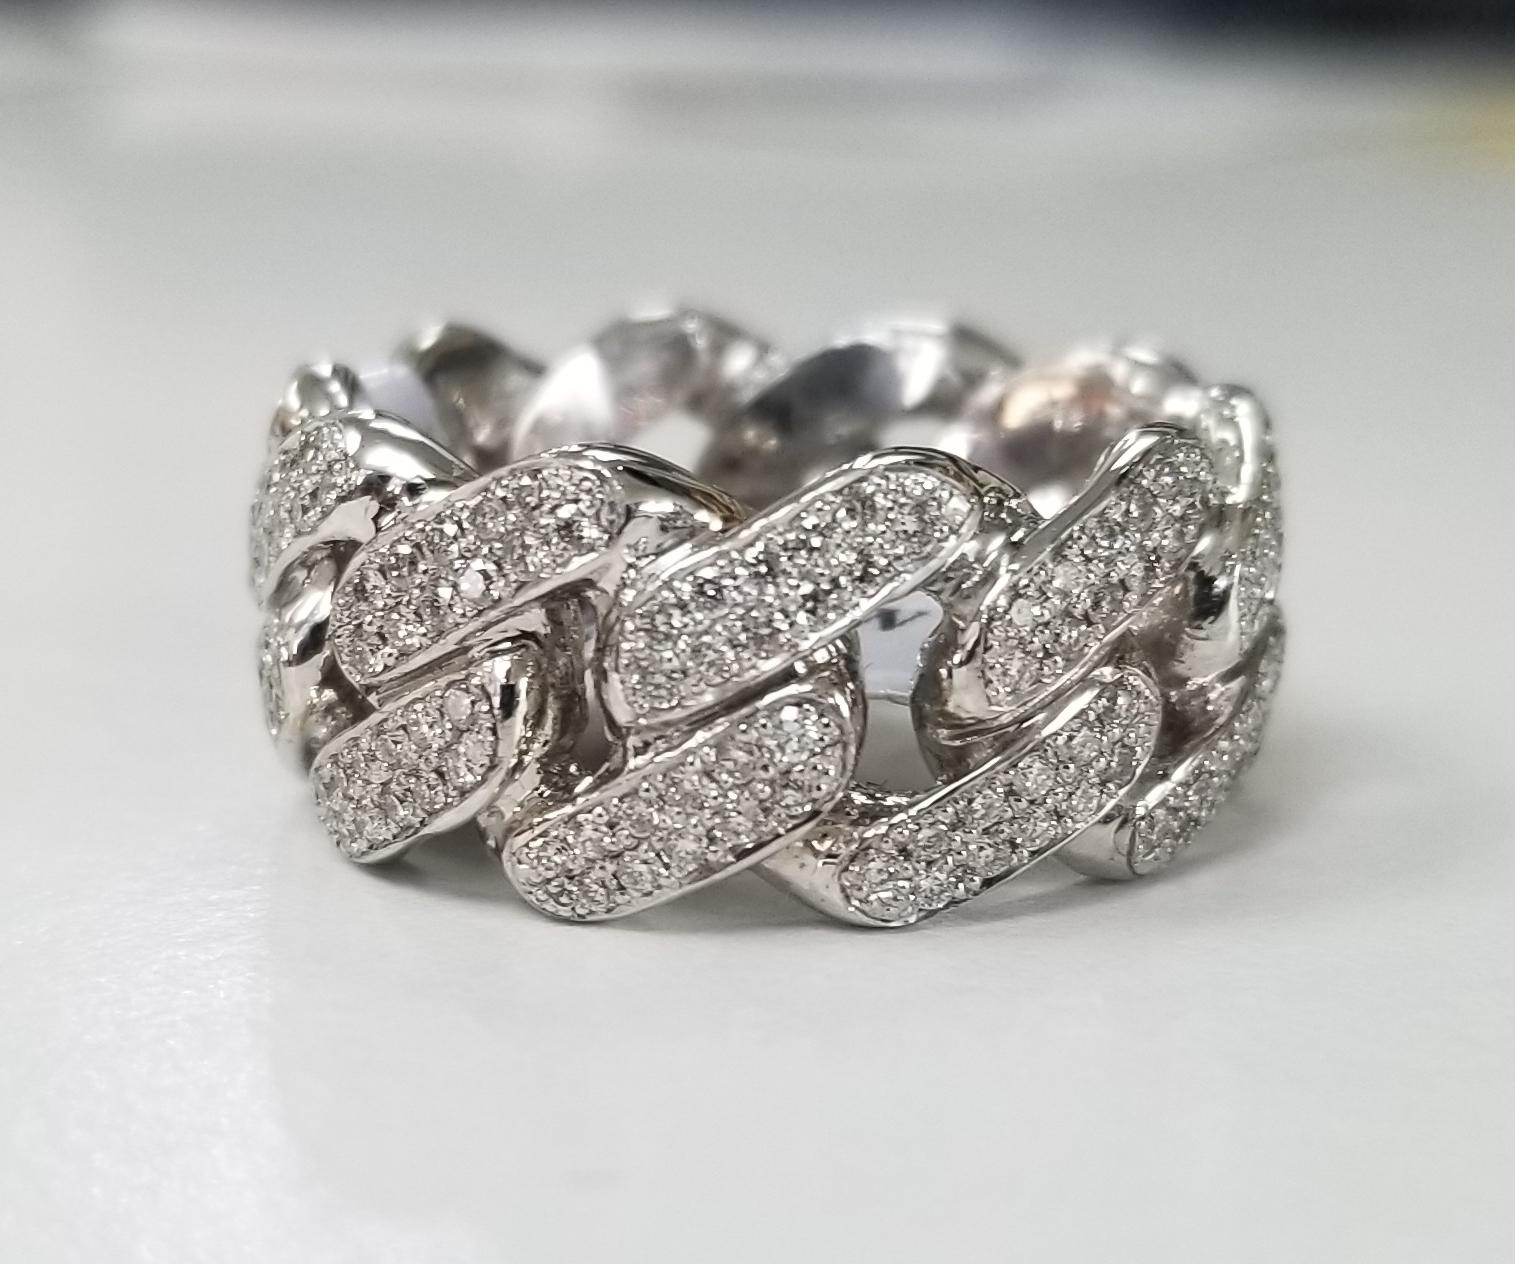 14 karat white gold diamond pave' link ring, containing 220 round full cut diamonds of very fine quality weighing 1.26cts. ring size is 9 and is 9mm wide. The ring is a eternity ring, meaning diamonds all around.